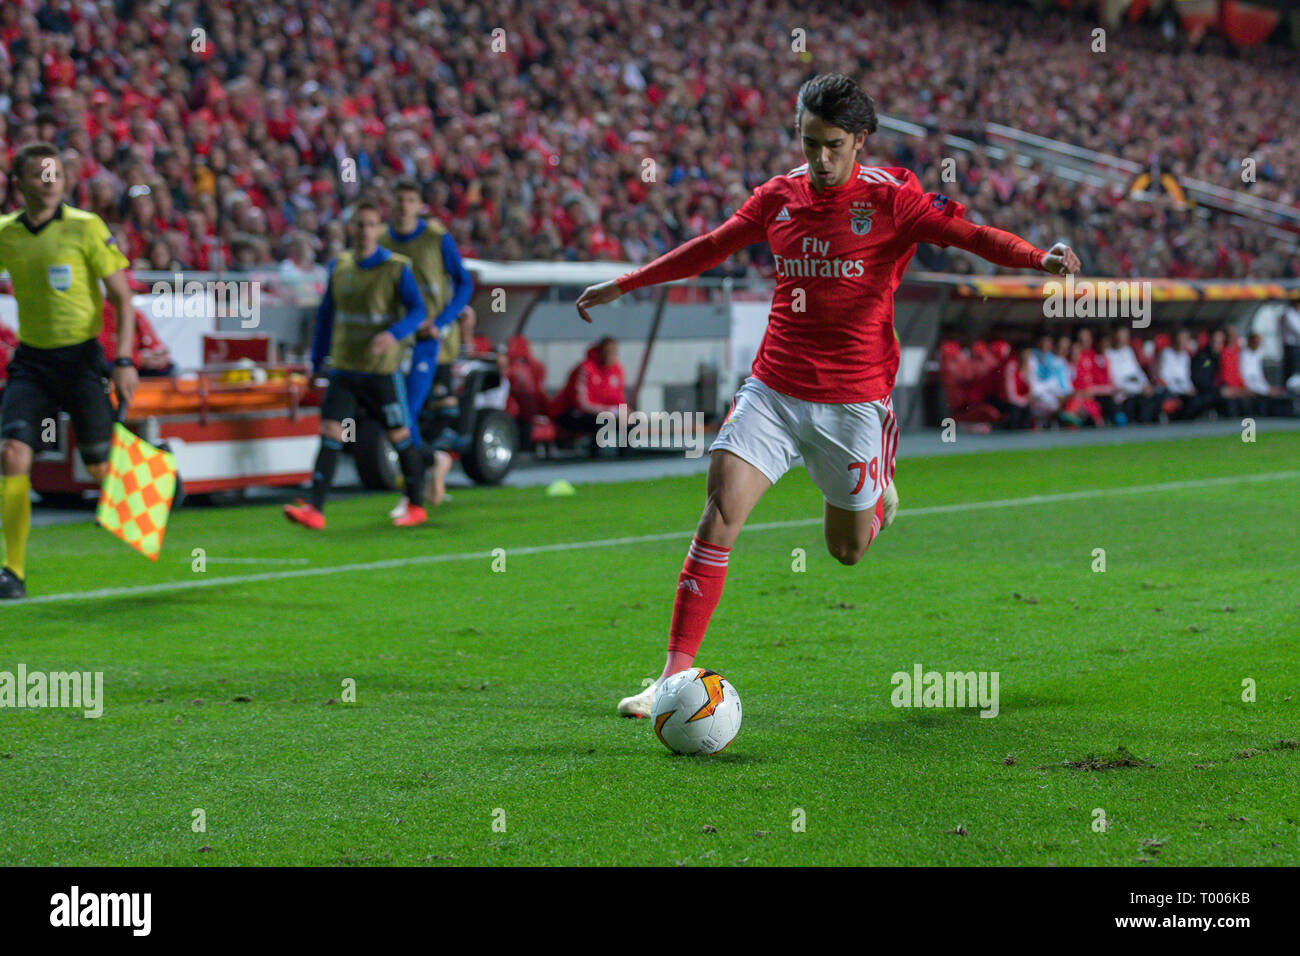 Lisbon, Portugal. March 16th 2019.. Benfica's forward from Portugal Joao Felix (79) in action during the game of the UEFA Europa League, 1/8 Finals, SL Benfica vs Dinamo Zagreb © Alexandre de Sousa/Alamy Live News Stock Photo